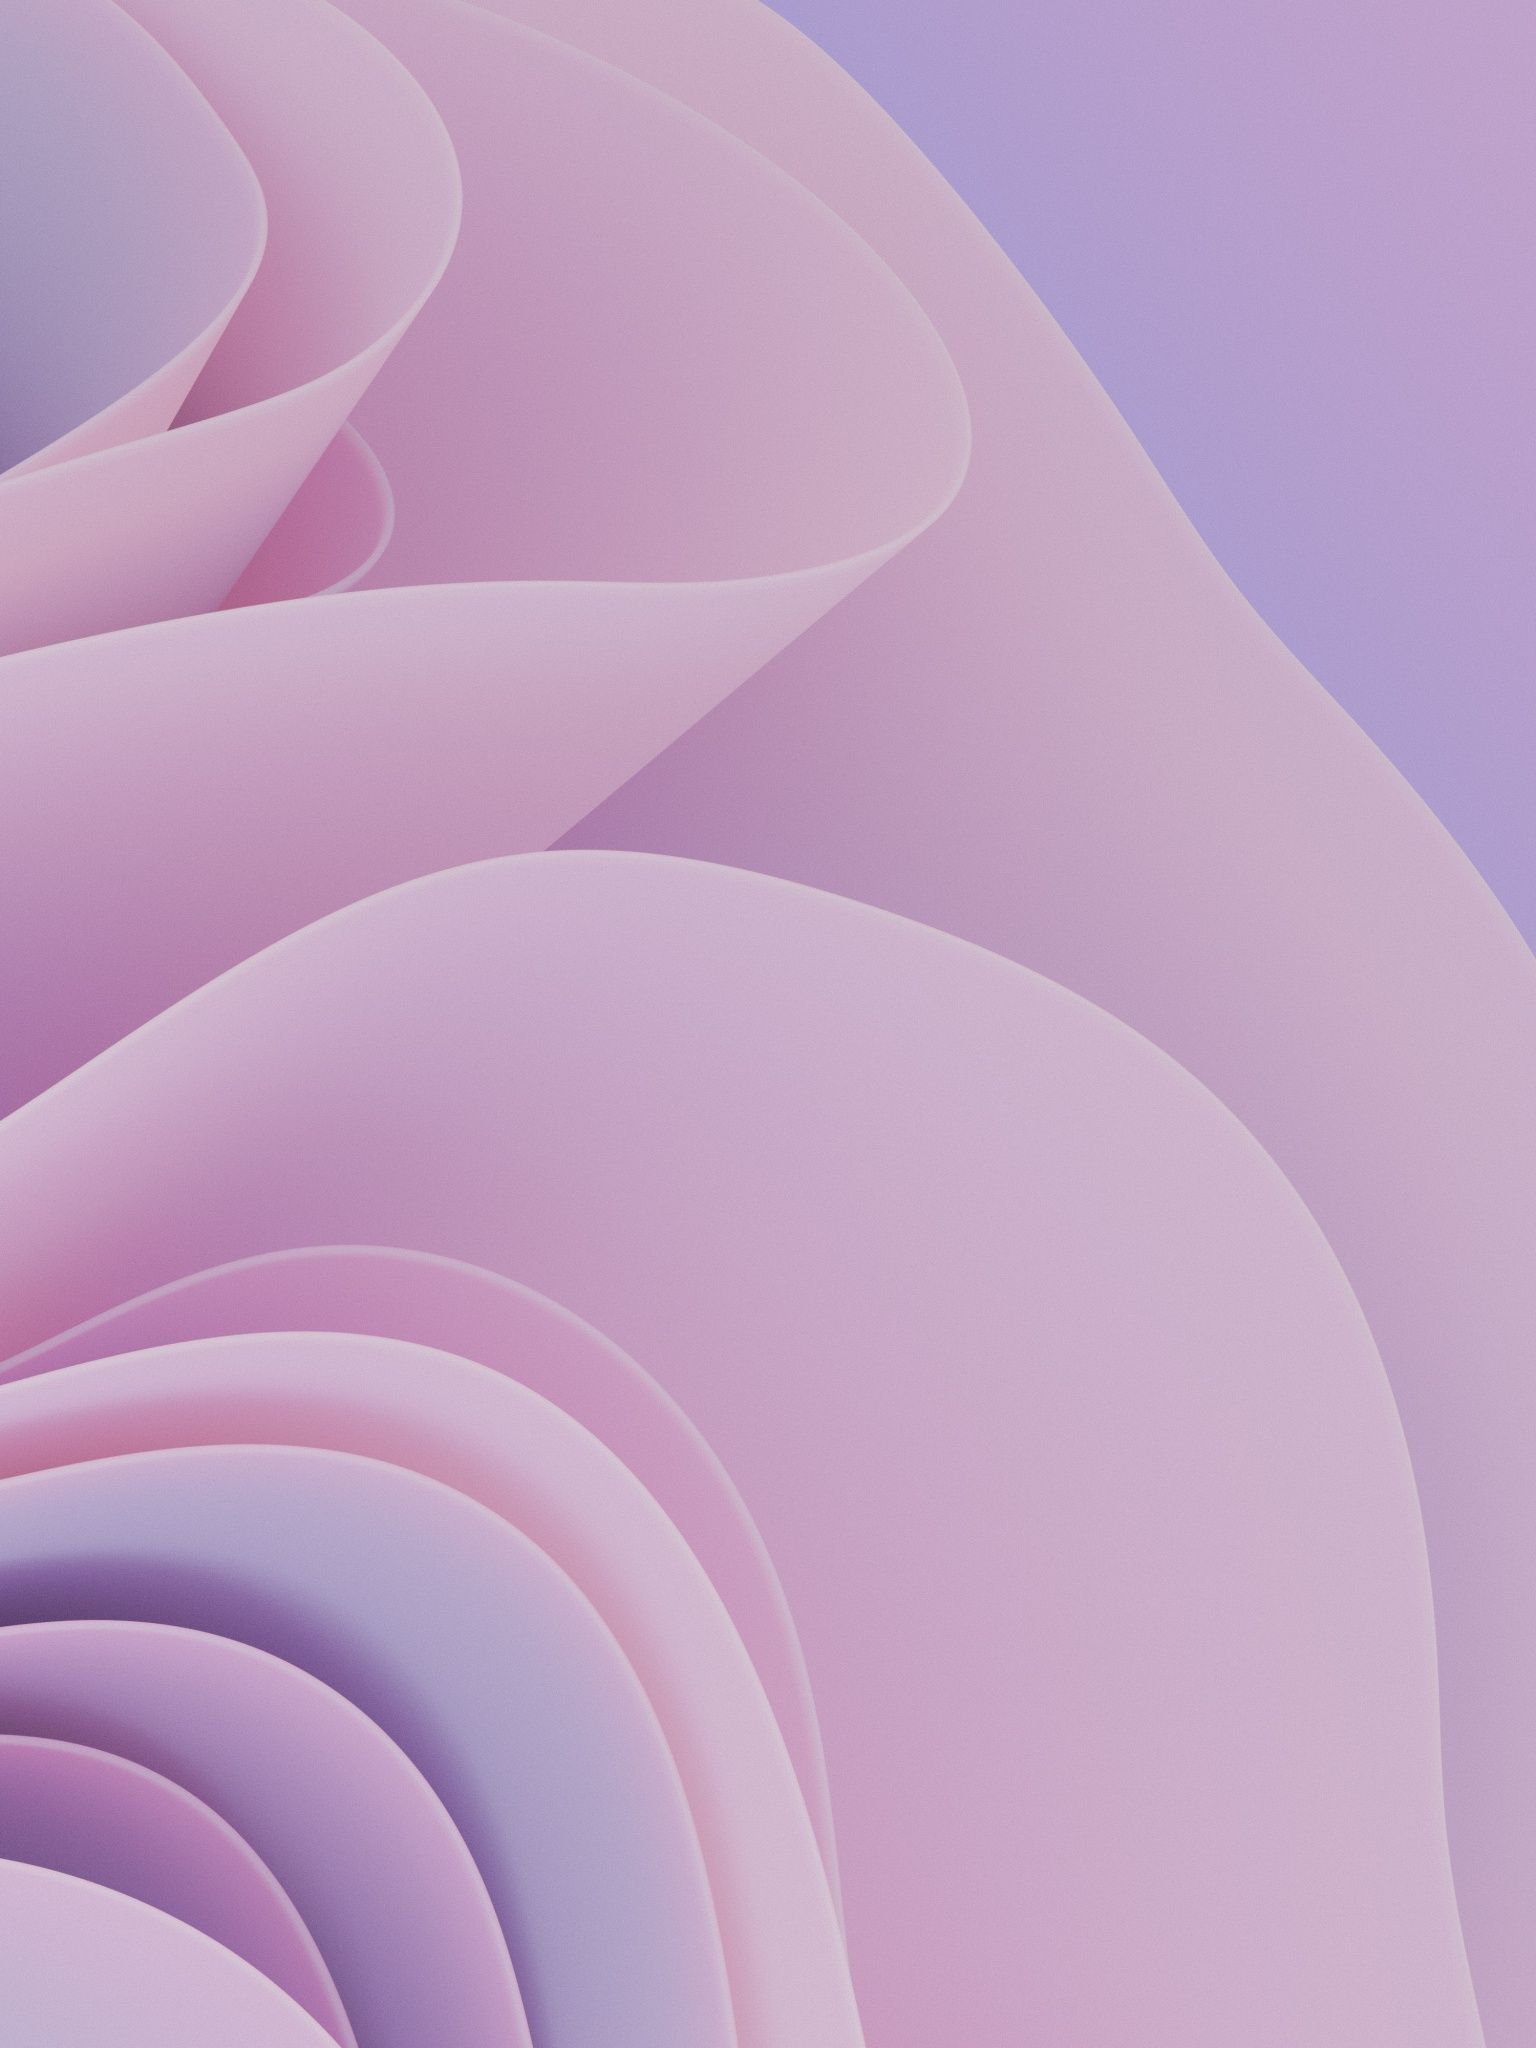 3D Render Wallpaper 4K, Waves, Girly, Pink abstract